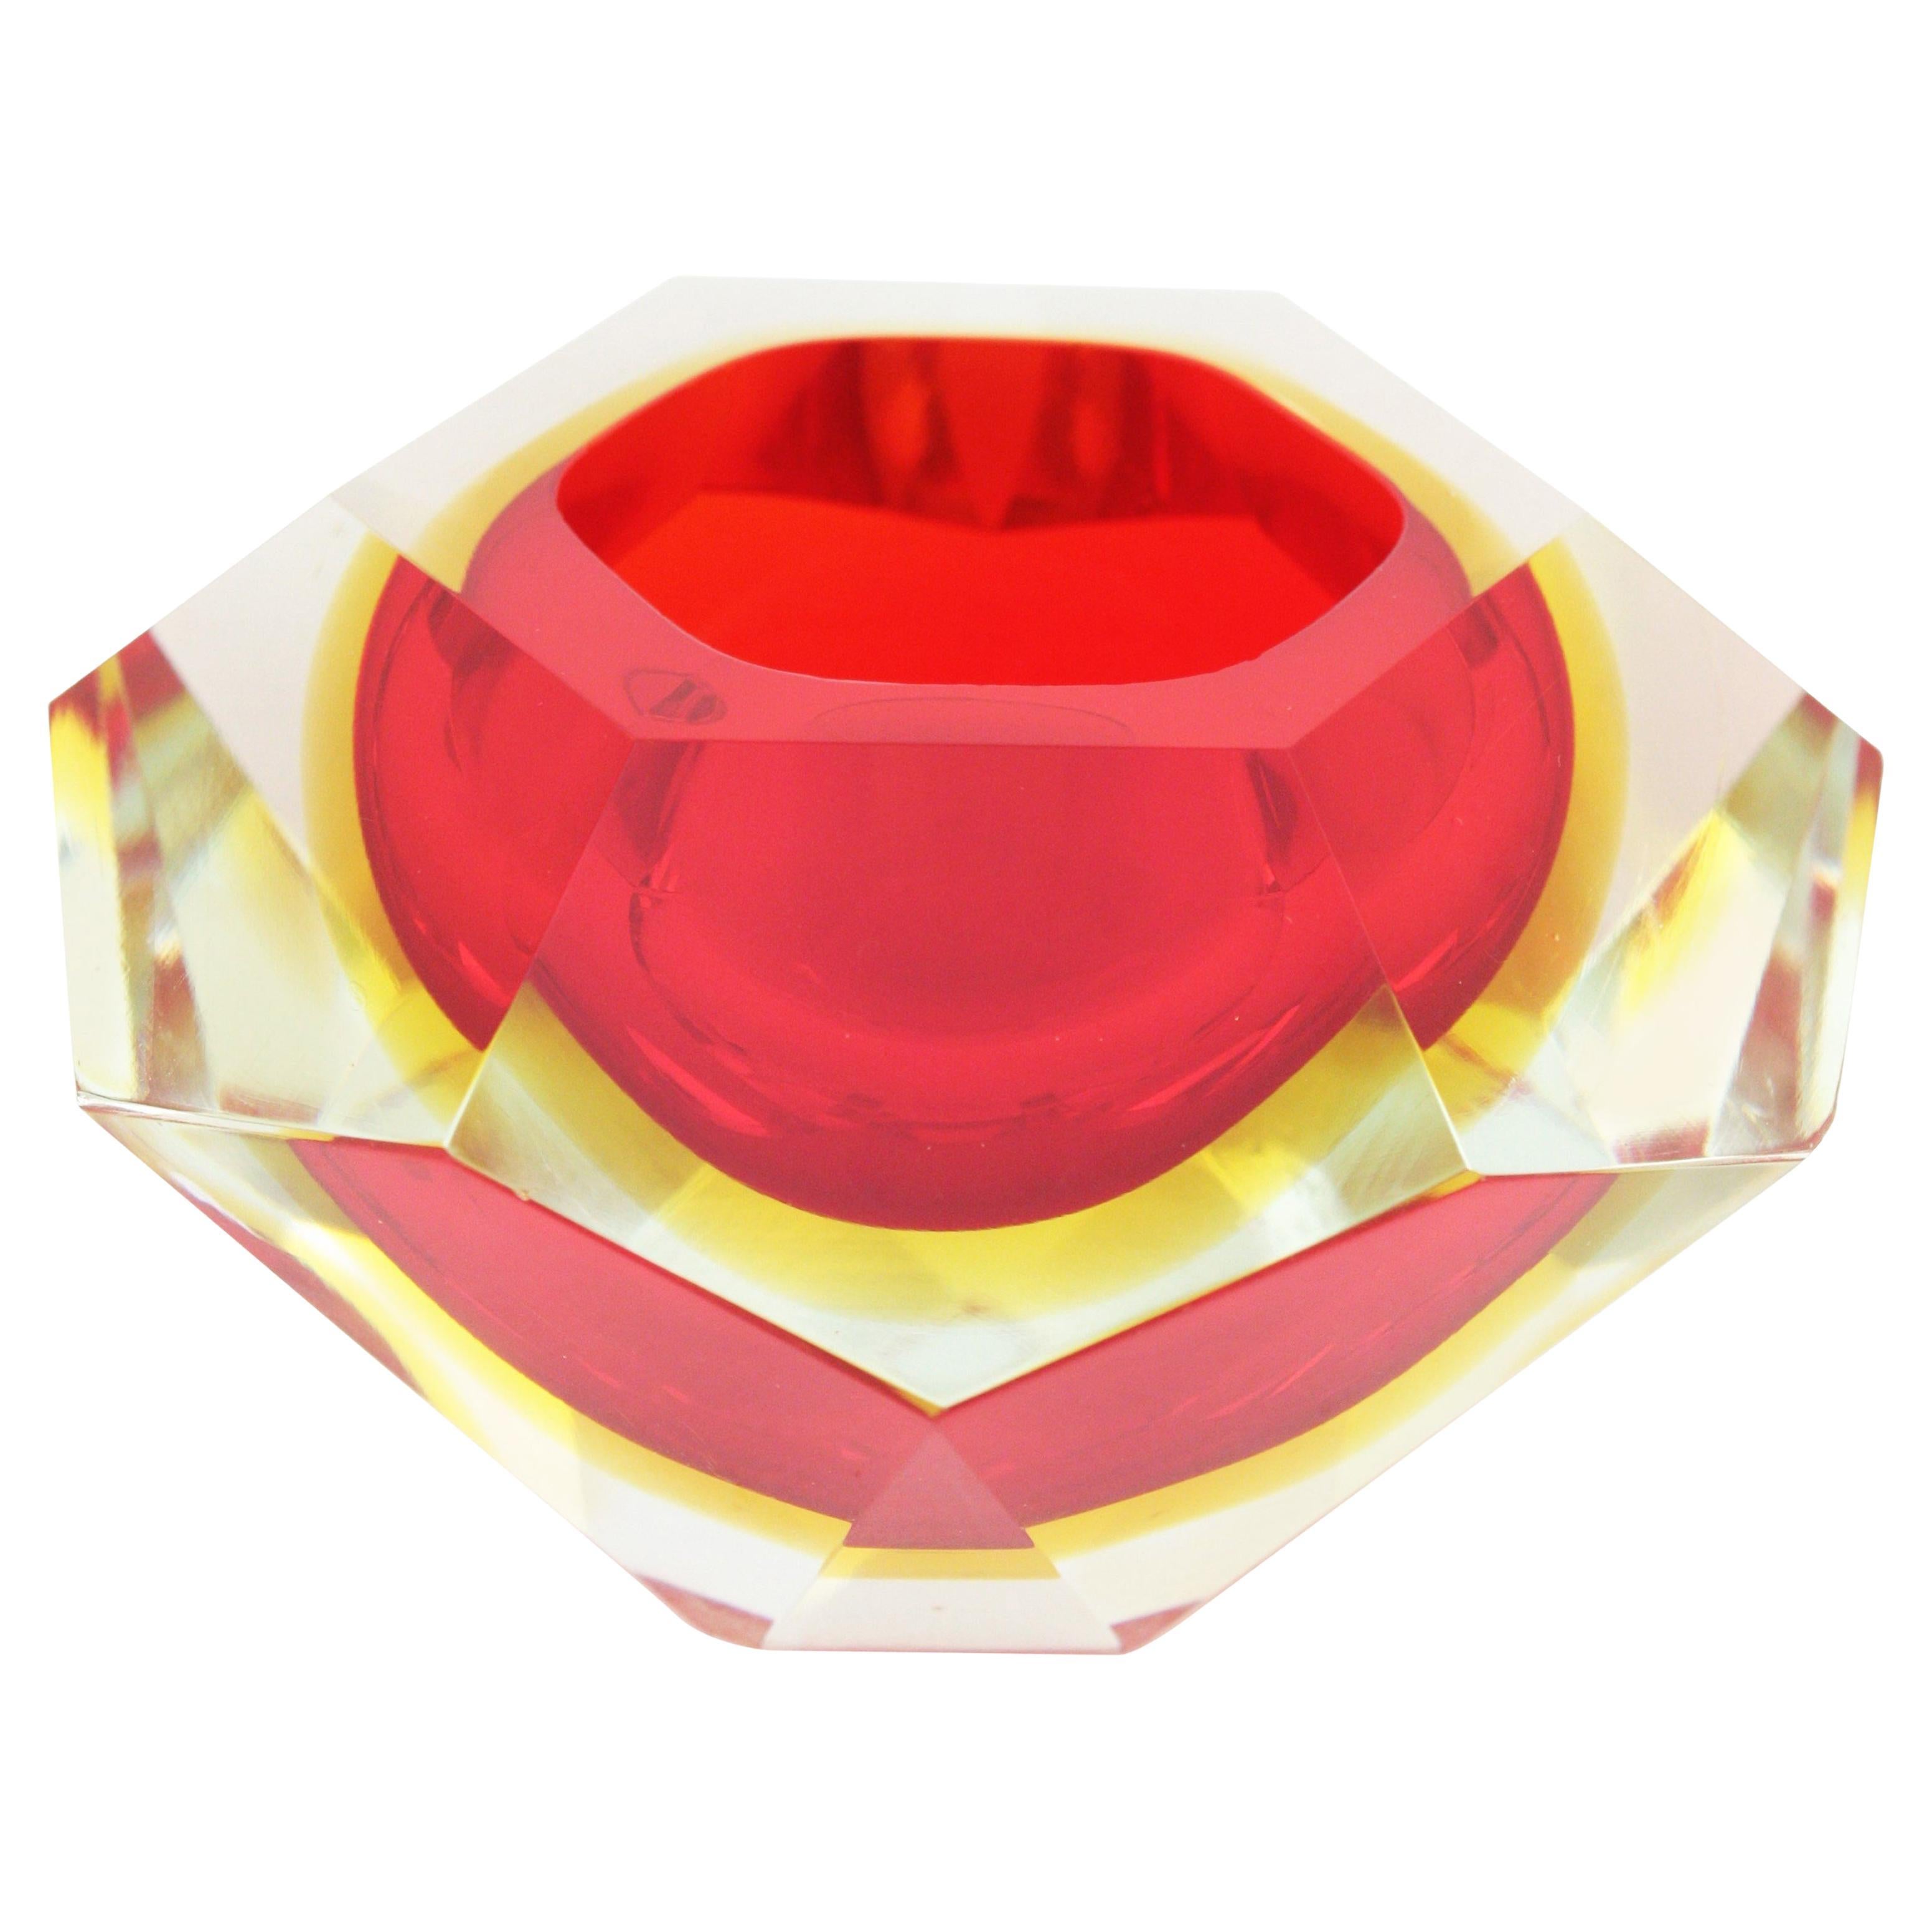 Flavio Poli Murano Red, Yellow and Clear Faceted Glass Diamond Bowl or Ashtray For Sale